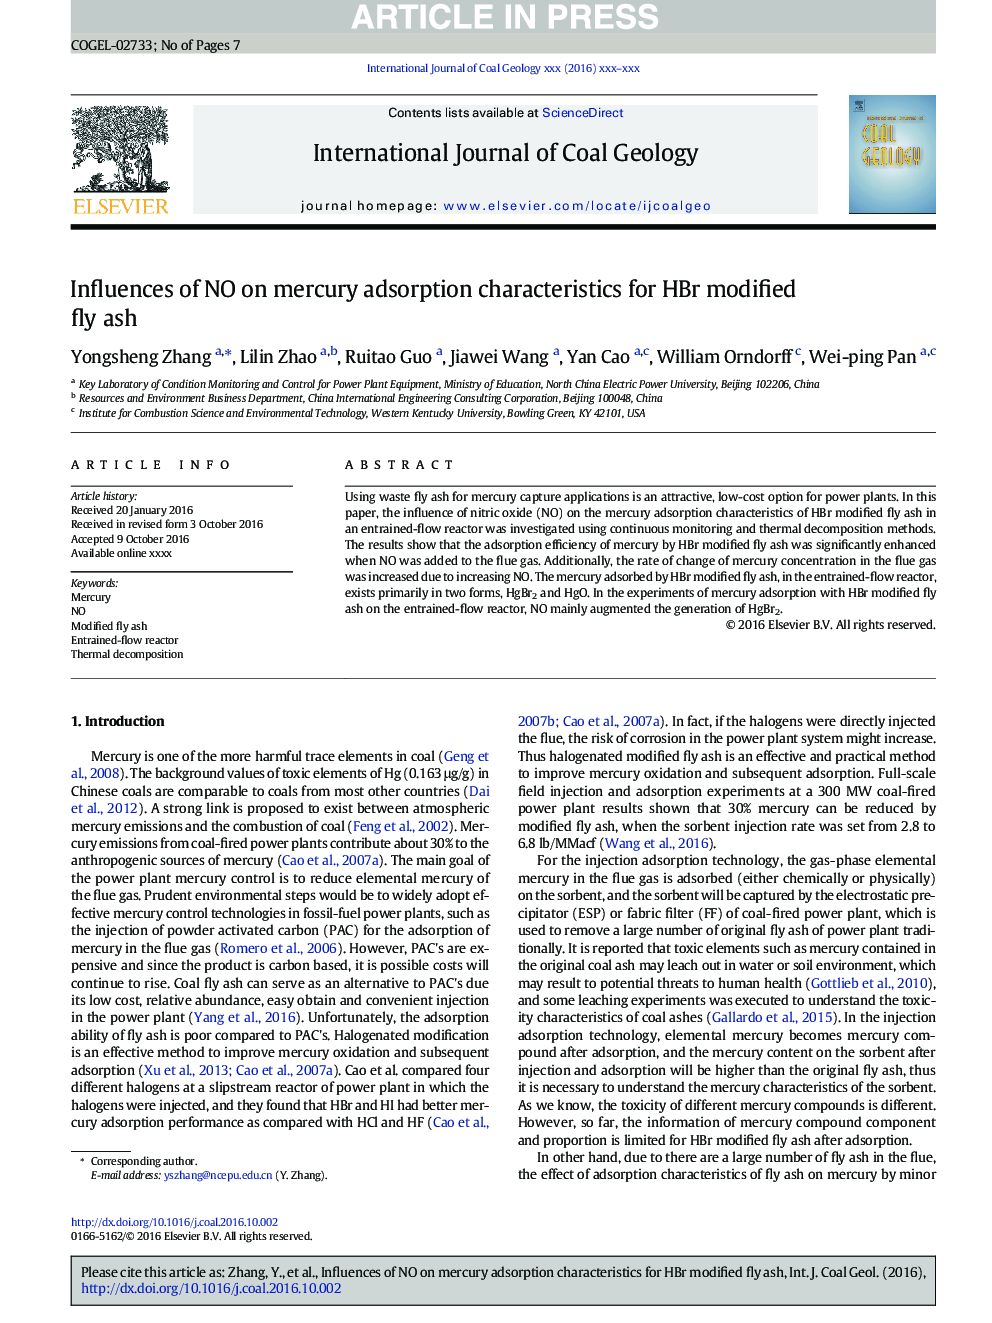 Influences of NO on mercury adsorption characteristics for HBr modified fly ash